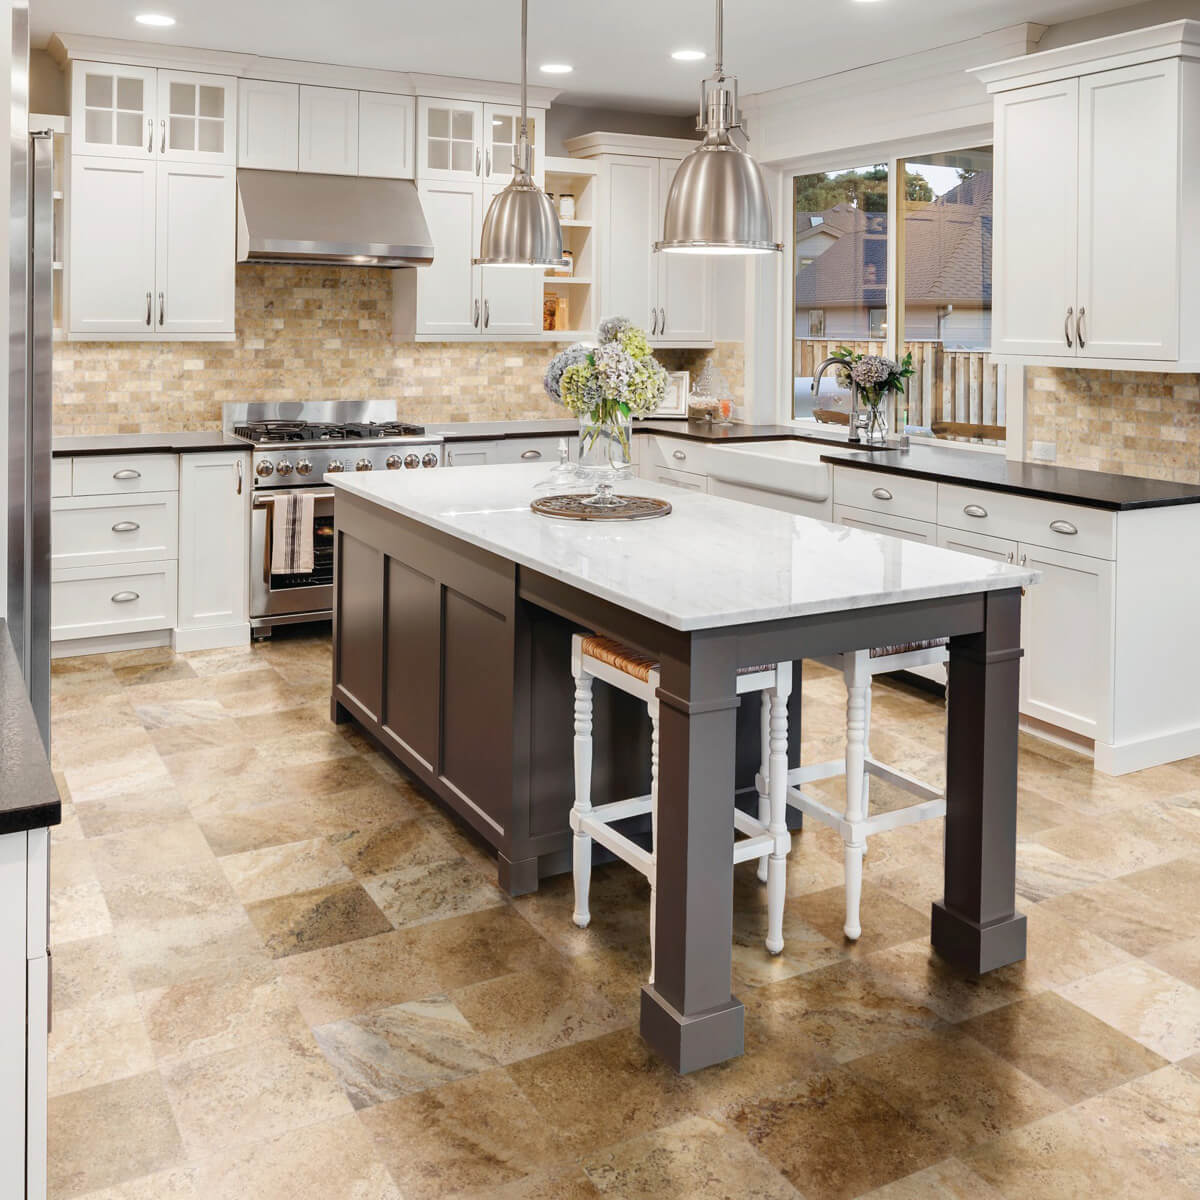 Kitchen cabinets & countertop | Floor to Ceiling Grand Island